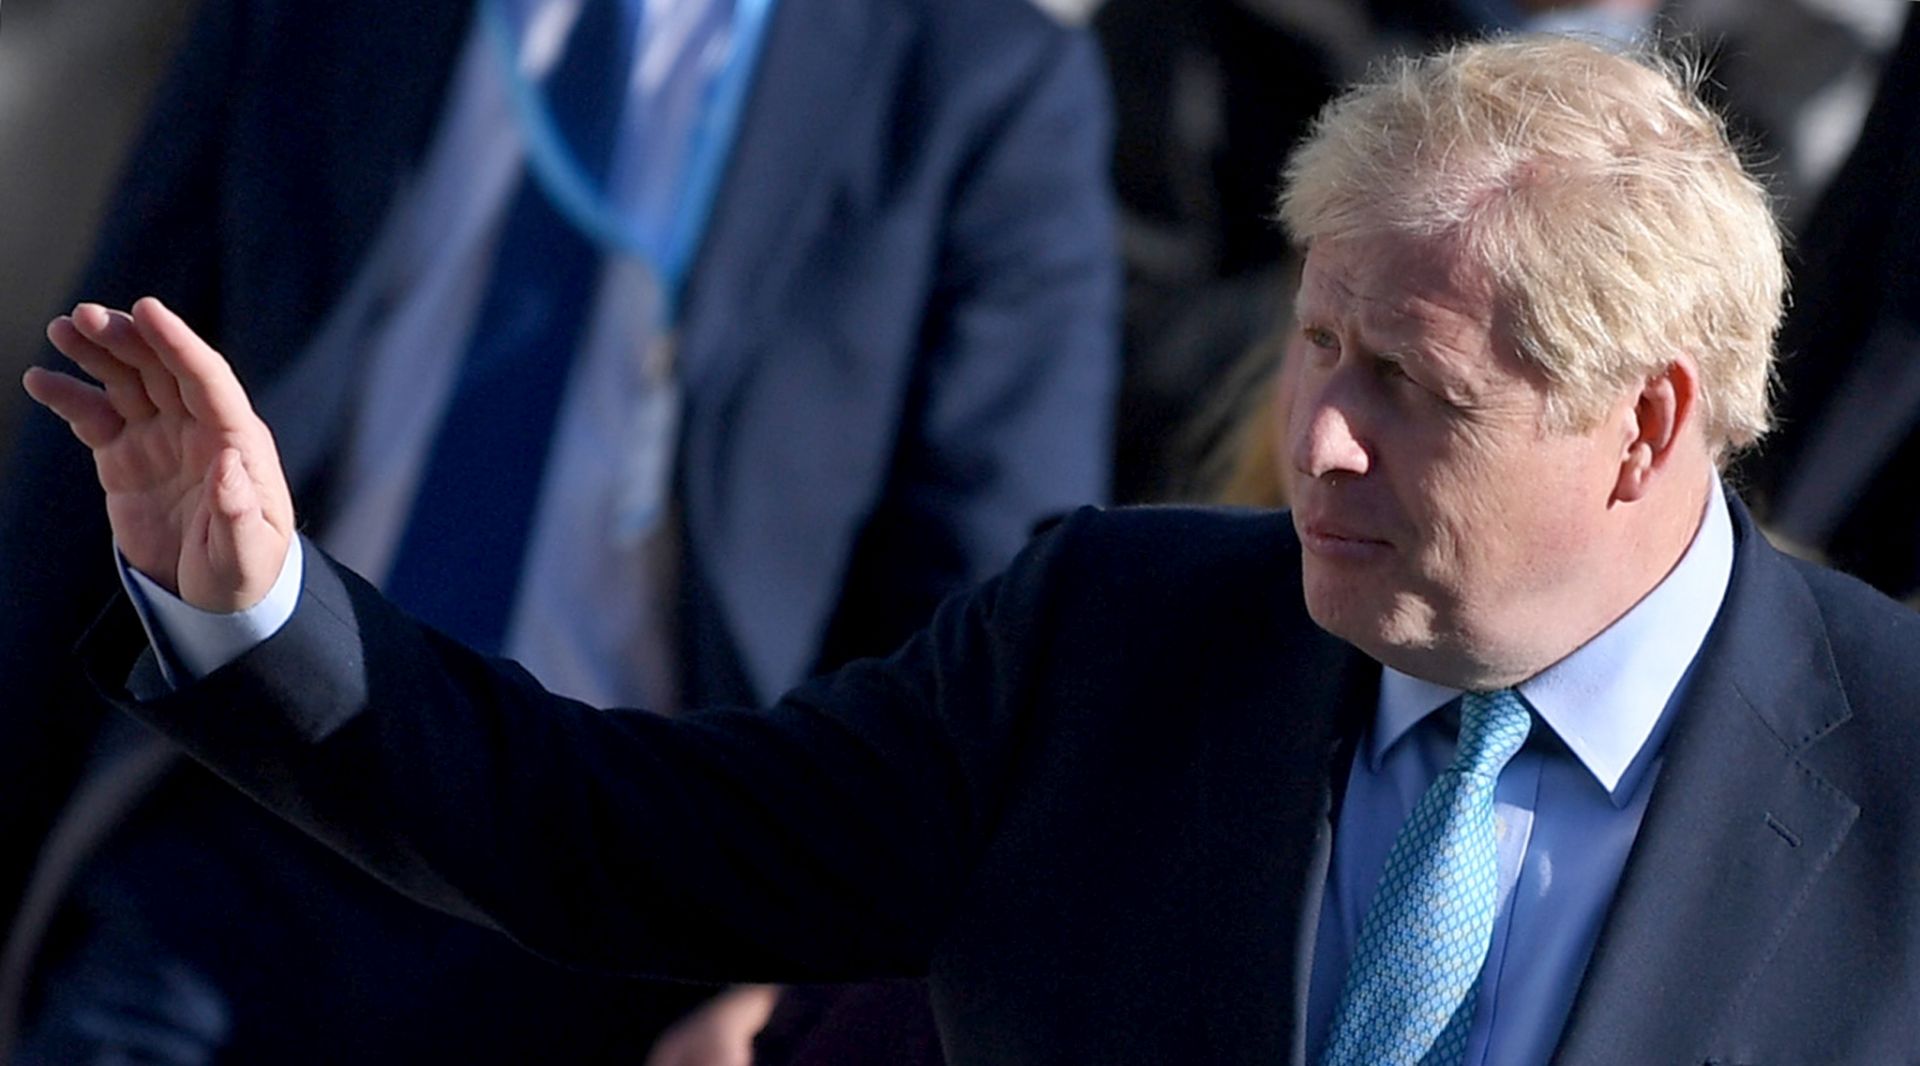 epa07888396 Britain's Prime Minister Boris Johnson arrives at the Conservative Party Conference in Manchester, Britain, 02 October 2019, before delivering a keynote speech. The Conservative Party Conference runs from 29 September to 02 October 2019.  EPA/NEIL HALL